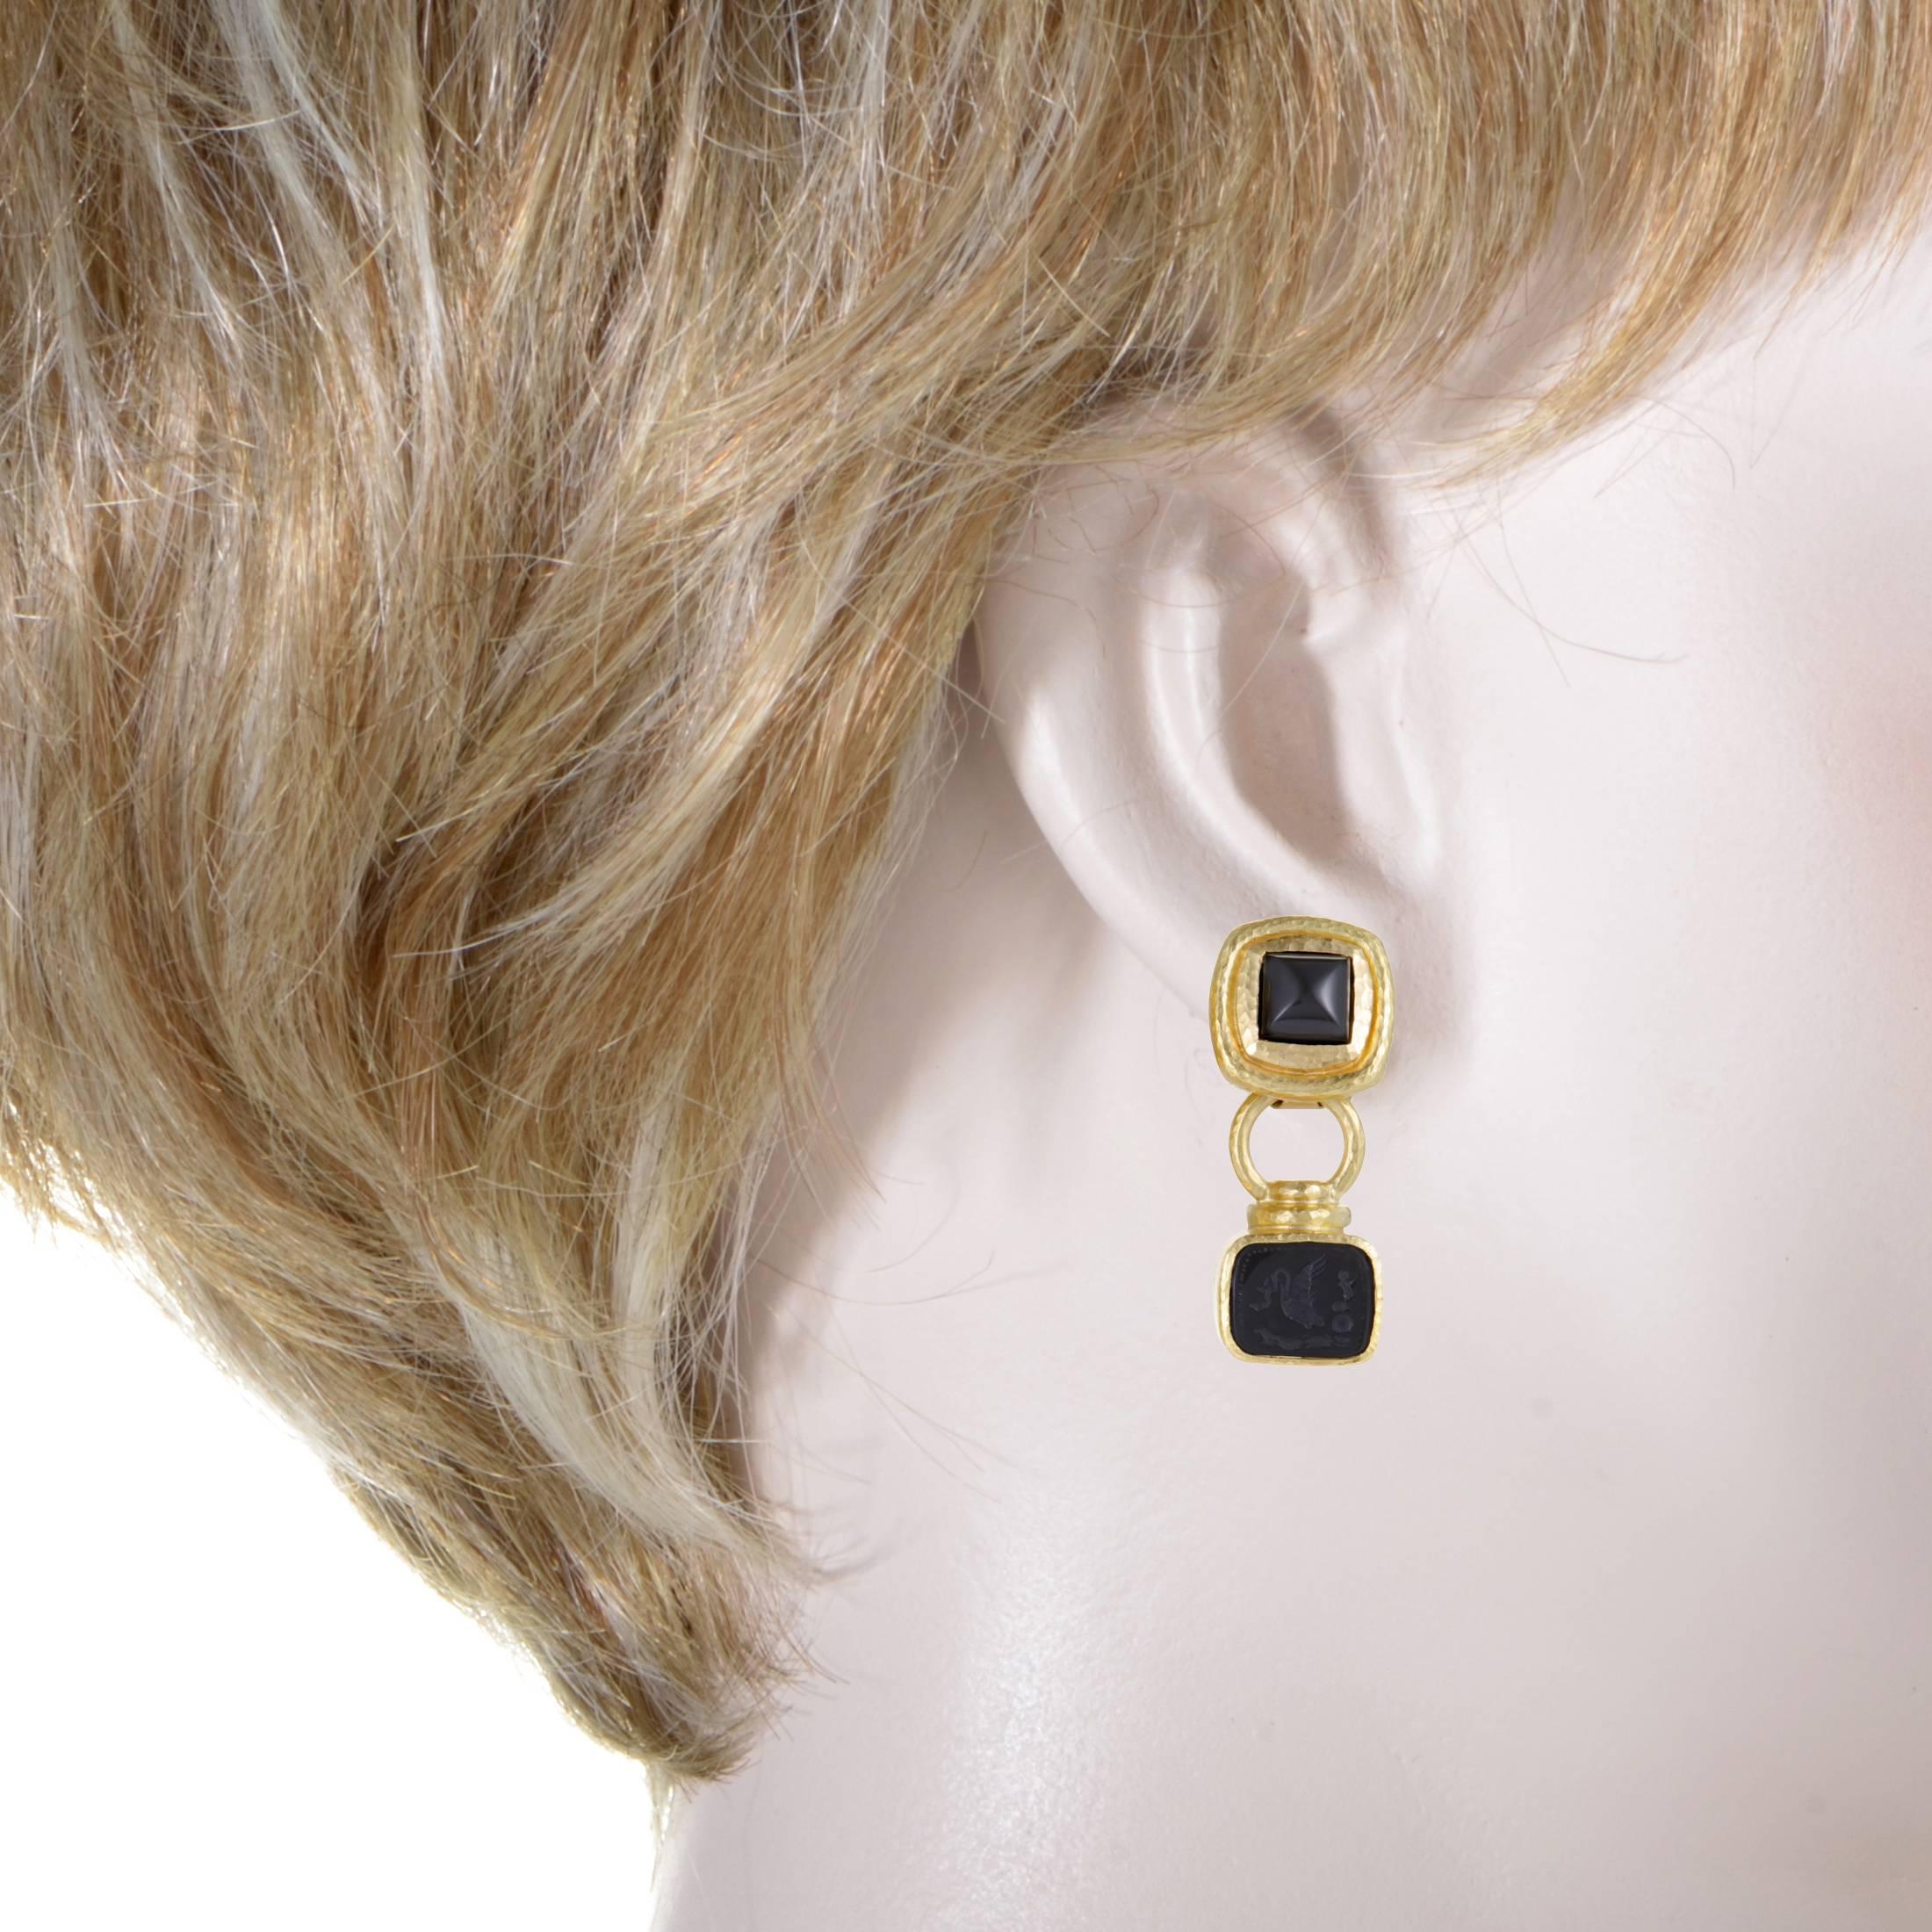 These superb earrings are designed by Elizabeth Locke and feature bold, eye-catching appearance with a distinct fashionable appeal. The pair is made of prestigious 19K gold and embellished with striking onyx stones.